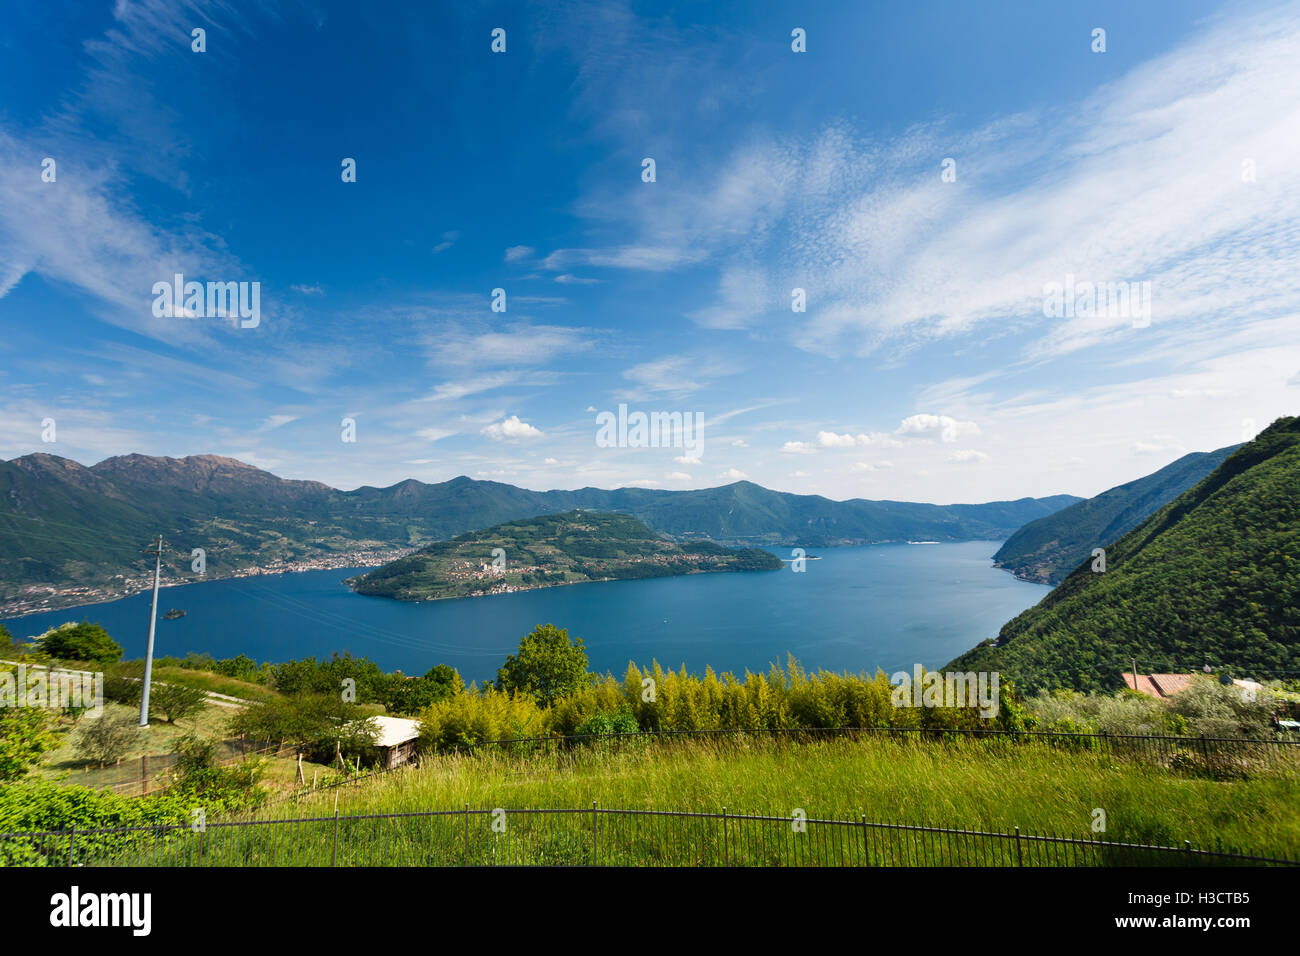 Landscape of Monte Isola Island in North Italy Stock Photo